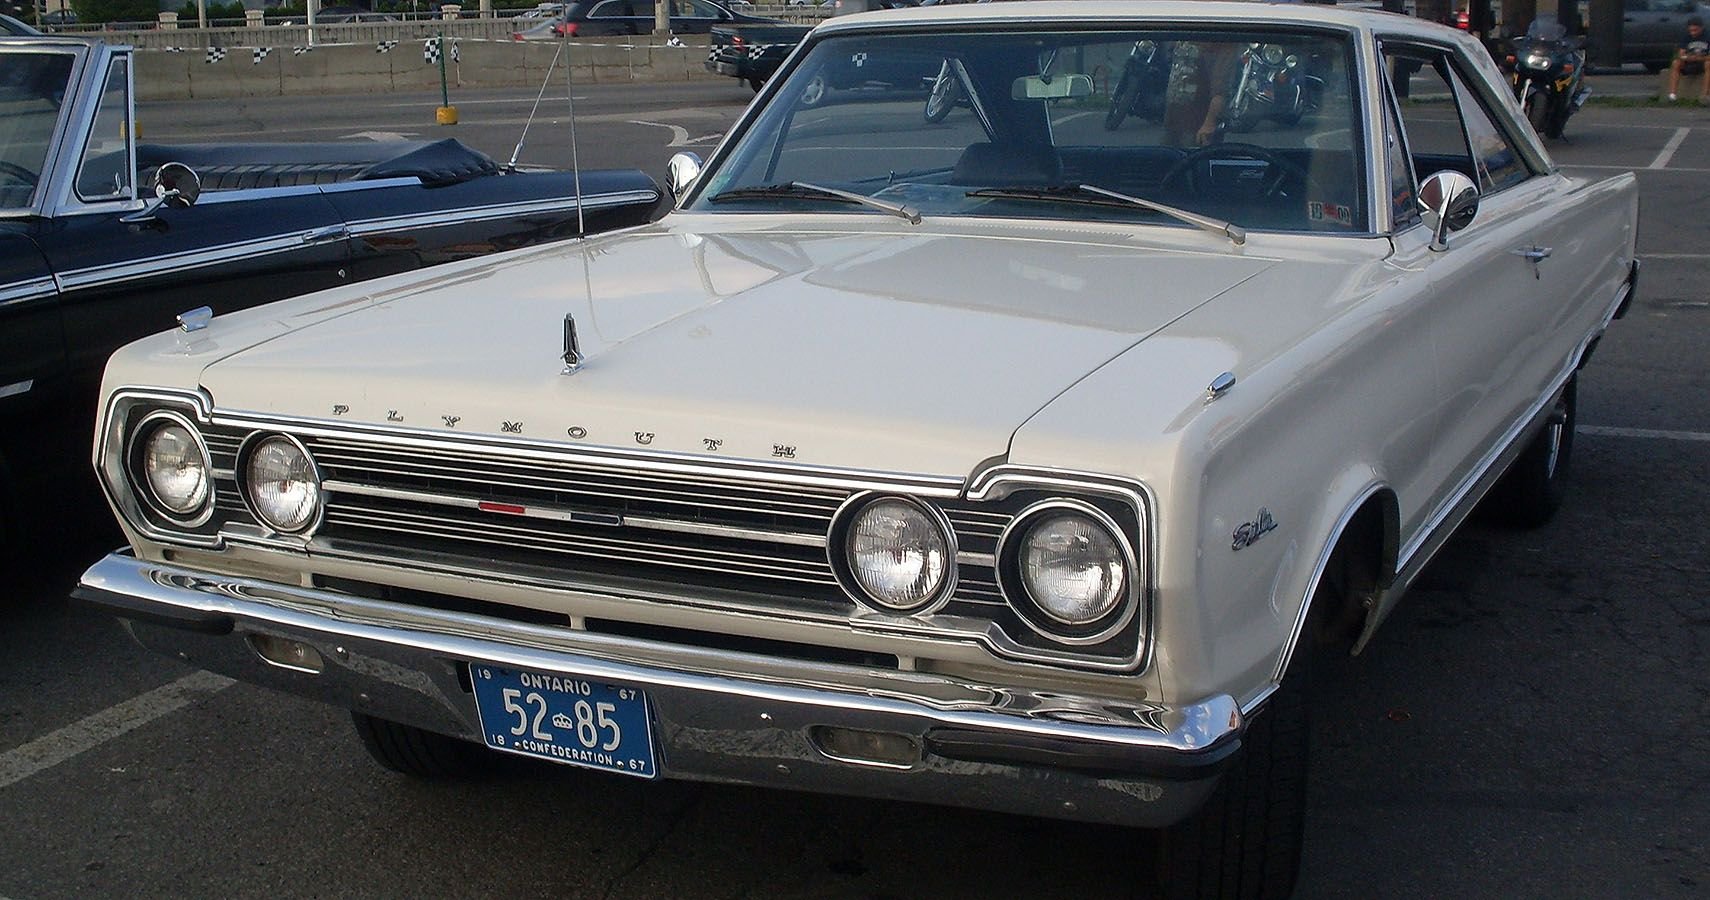 The 10 Best Cars Plymouth Ever Made, Ranked